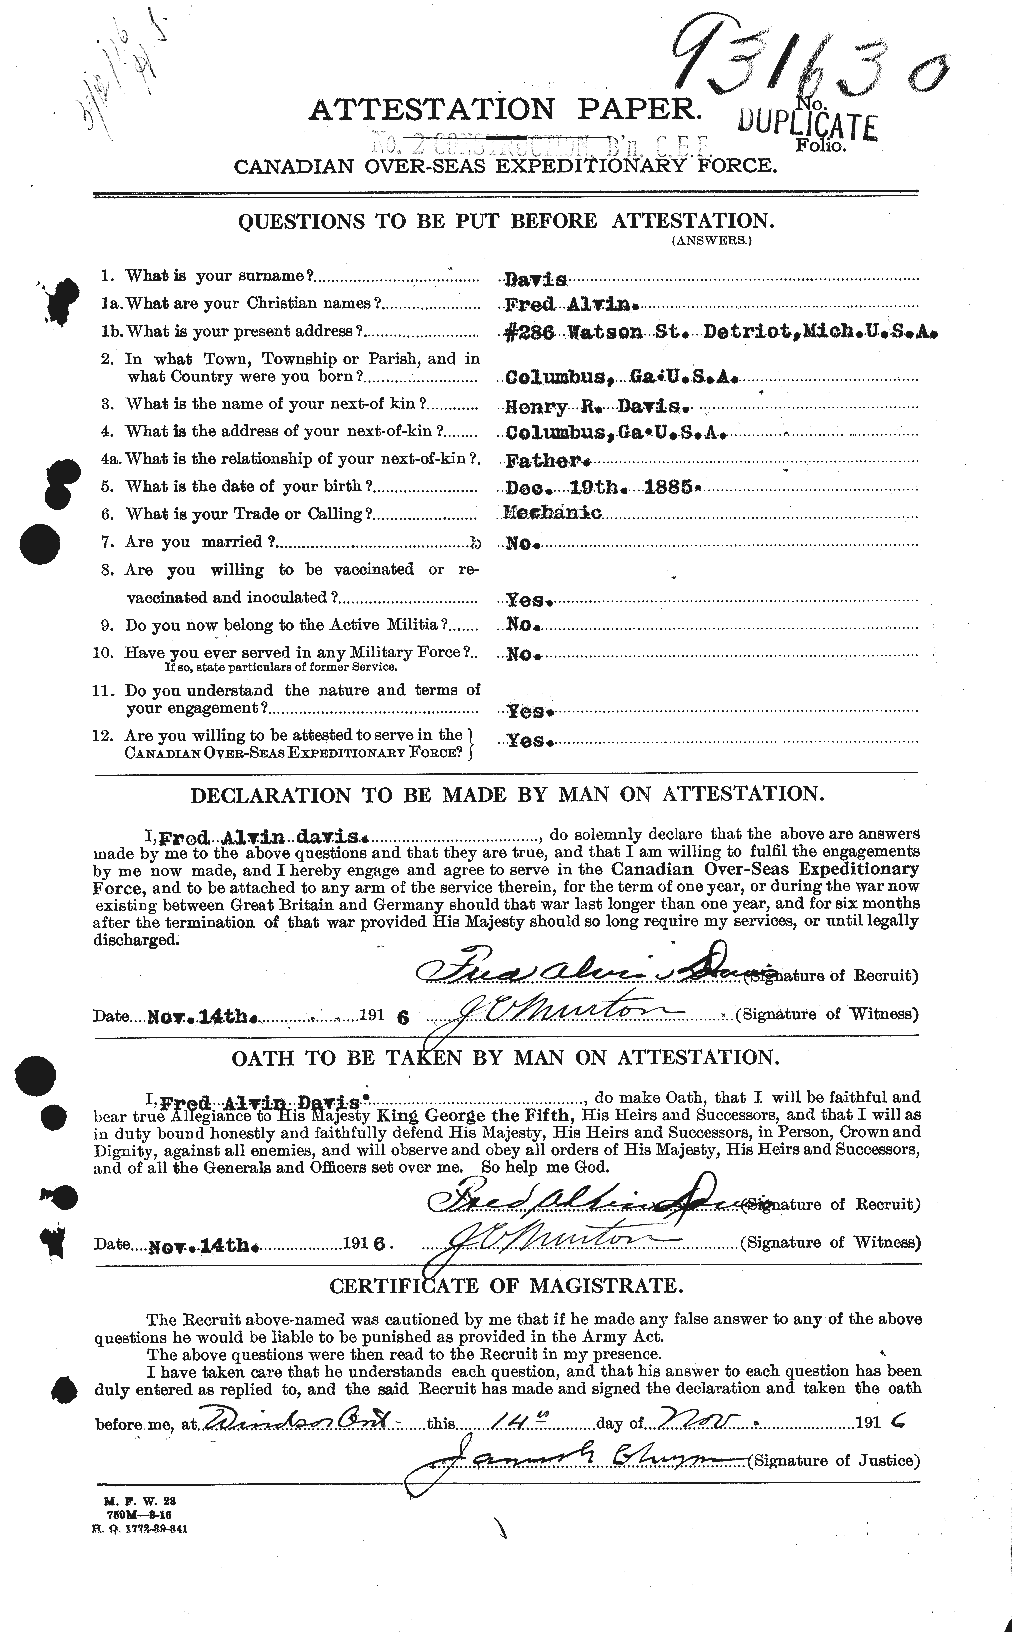 Personnel Records of the First World War - CEF 281927a